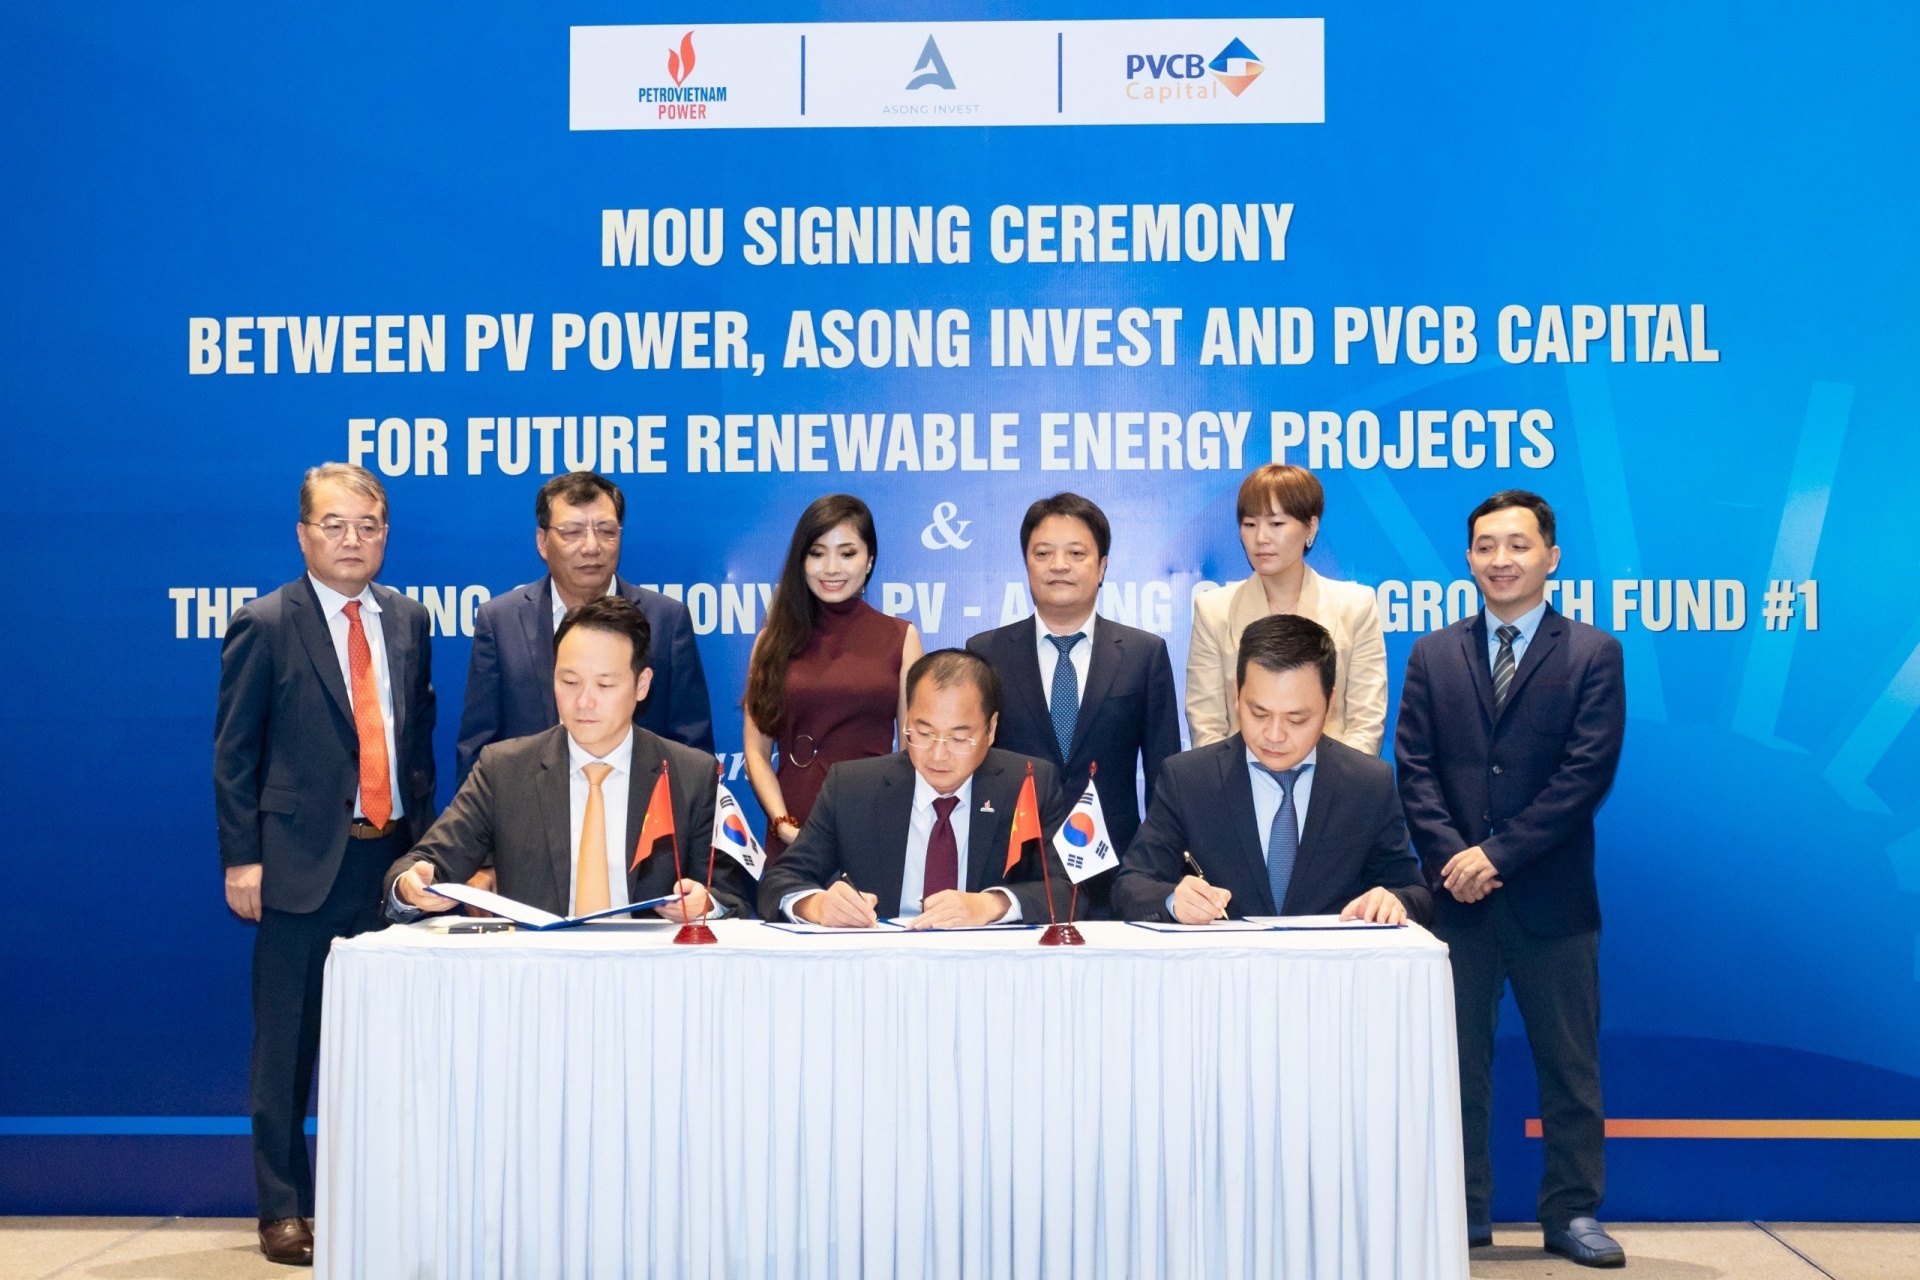 PV Power, Asong Invest, and PVCB Capital sign MoU on green industry